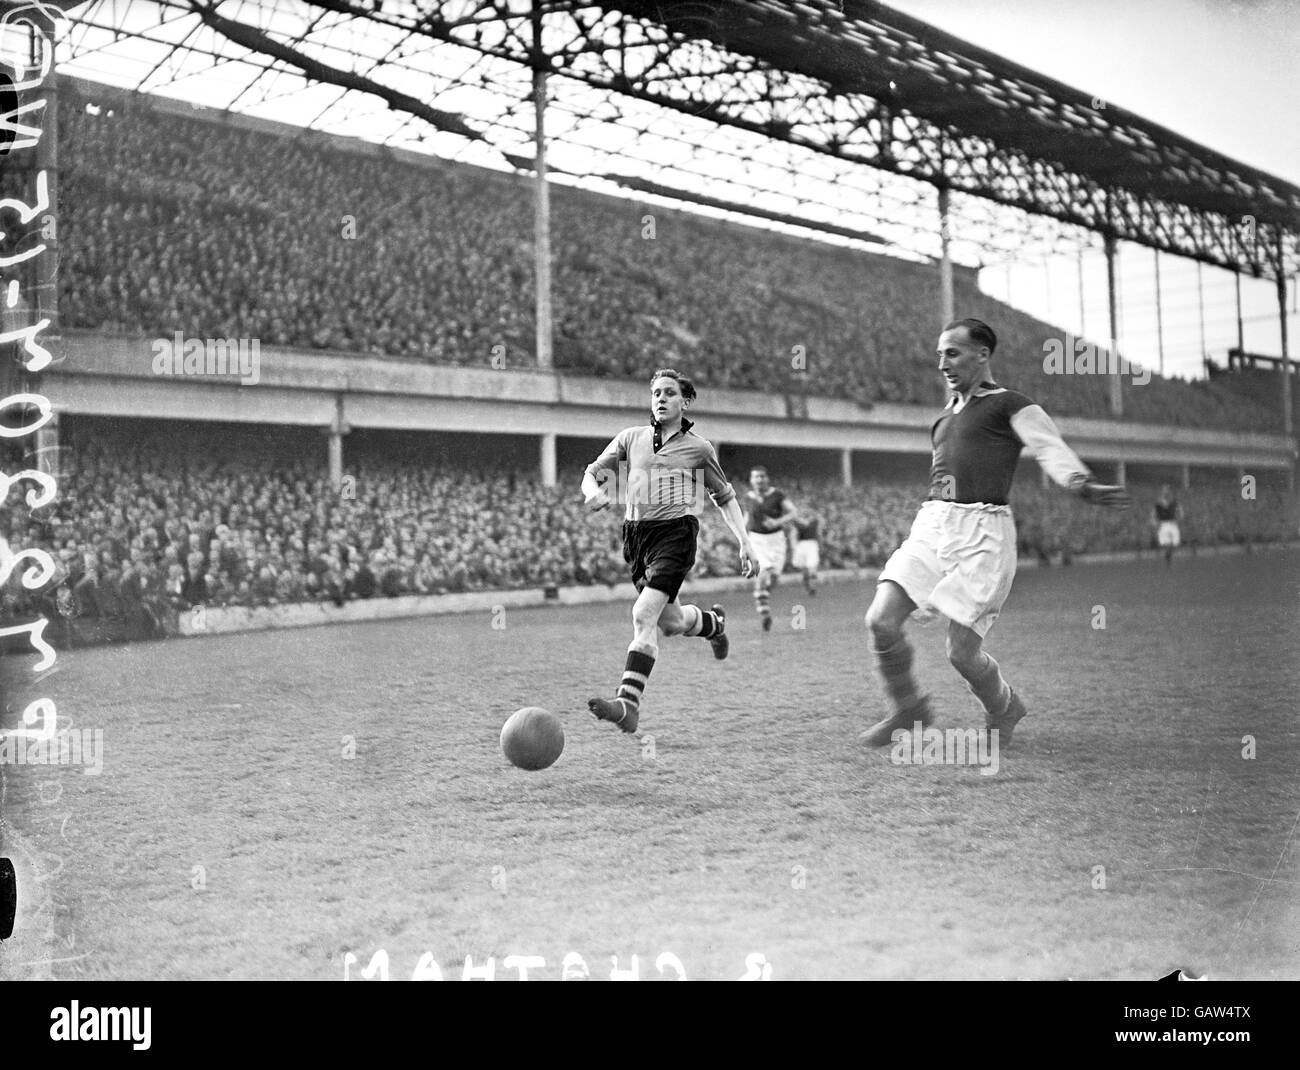 Soccer - Wartime League South - West Ham United v Wolverhampton Wanderers. Ray Chatham, Wolverhampton Wanderers (l) Stock Photo